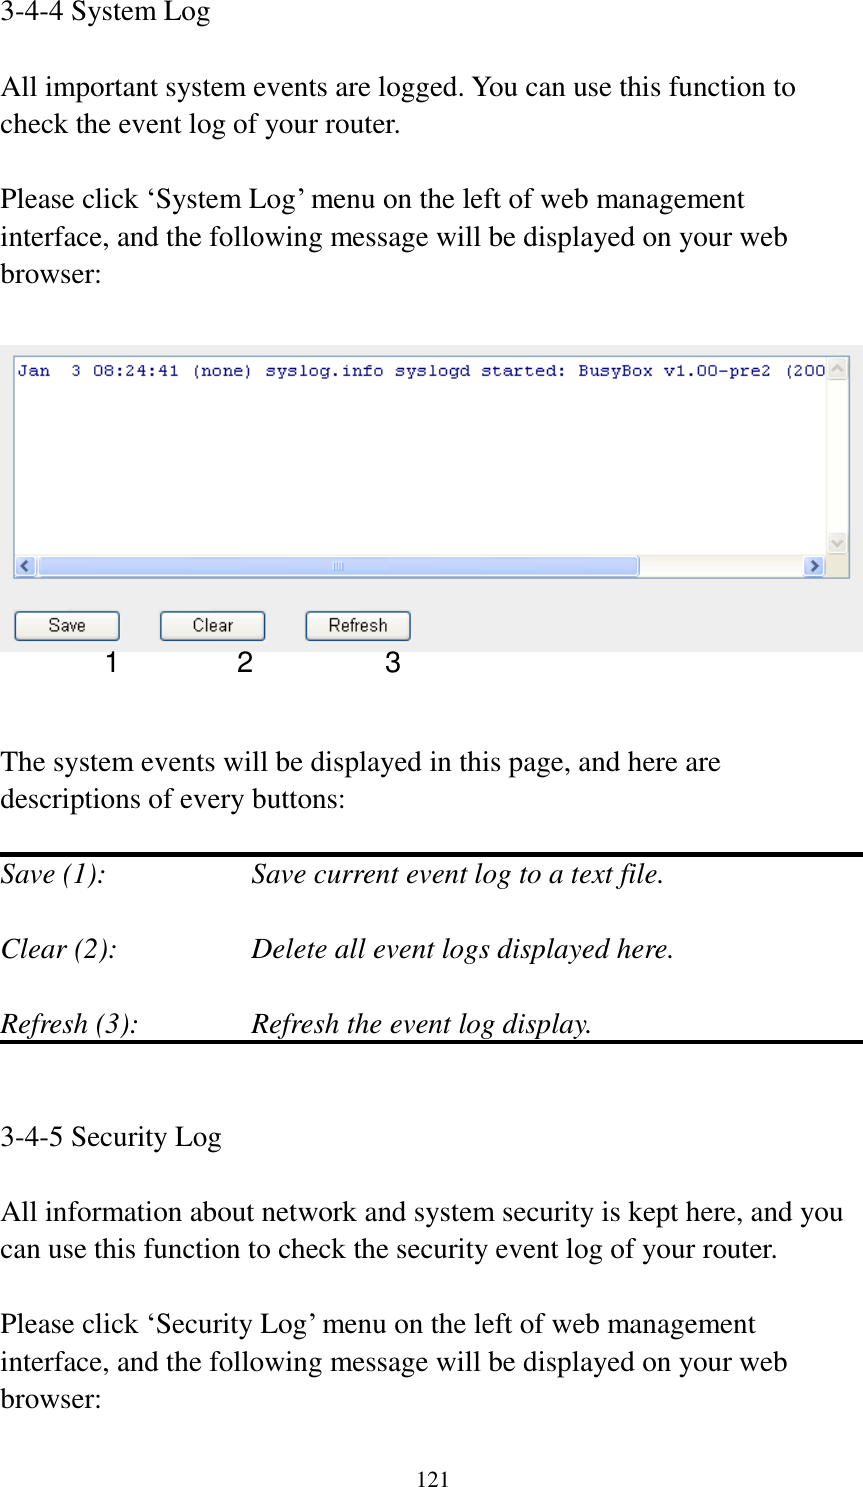 121 3-4-4 System Log  All important system events are logged. You can use this function to check the event log of your router.  Please click „System Log‟ menu on the left of web management interface, and the following message will be displayed on your web browser:     The system events will be displayed in this page, and here are descriptions of every buttons:  Save (1):        Save current event log to a text file.  Clear (2):        Delete all event logs displayed here.  Refresh (3):      Refresh the event log display.   3-4-5 Security Log  All information about network and system security is kept here, and you can use this function to check the security event log of your router.  Please click „Security Log‟ menu on the left of web management interface, and the following message will be displayed on your web browser: 1 2 3 